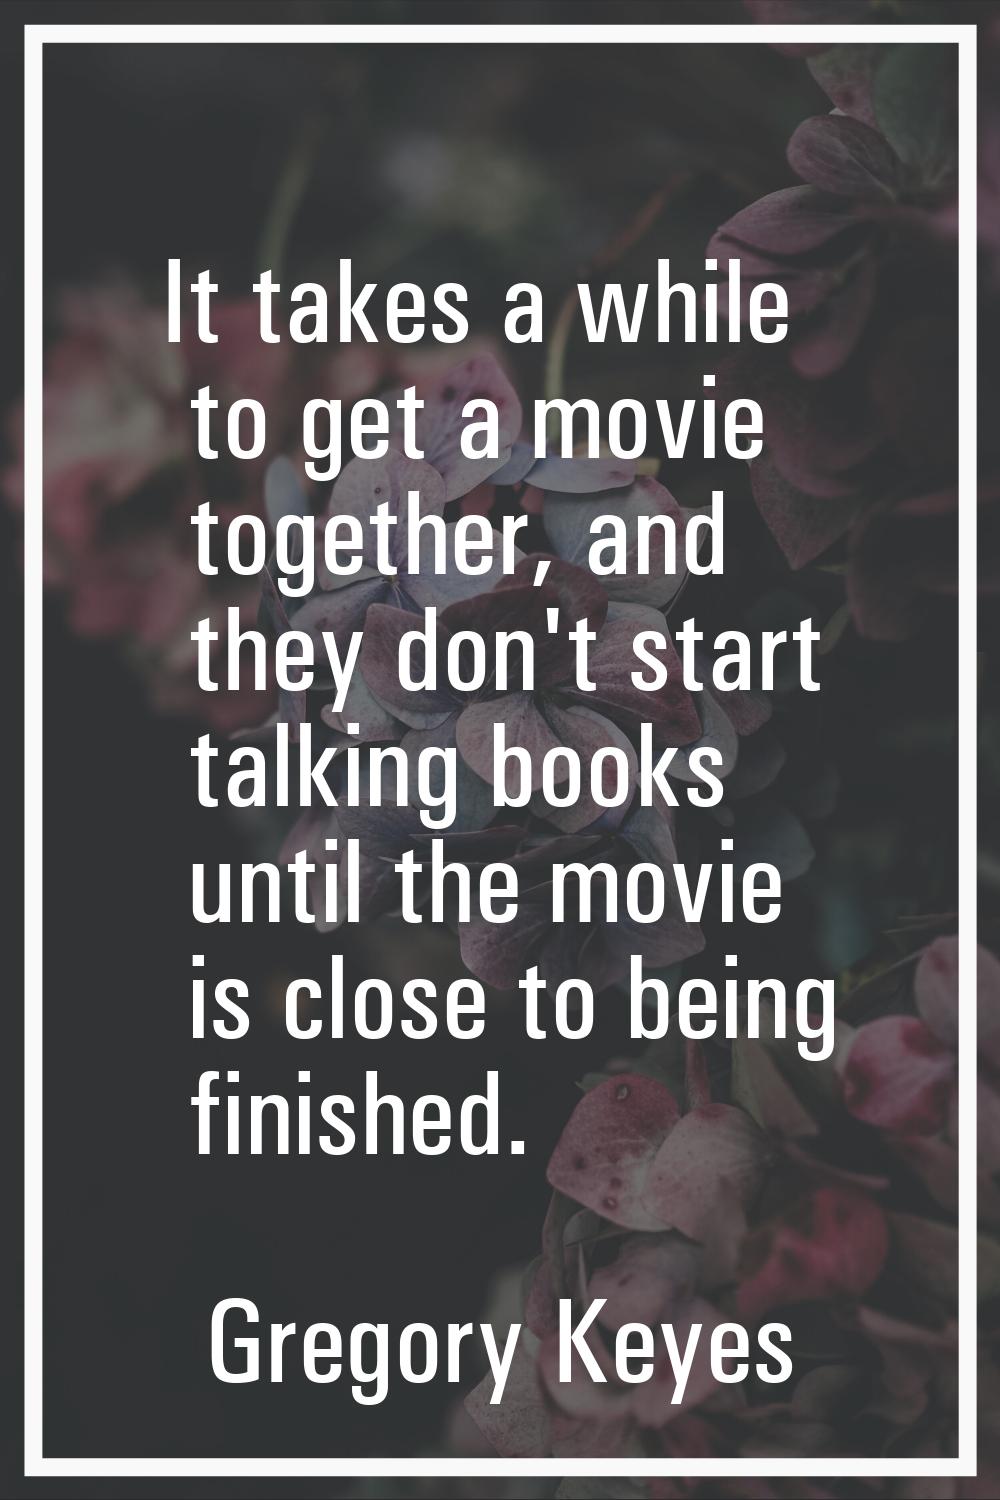 It takes a while to get a movie together, and they don't start talking books until the movie is clo